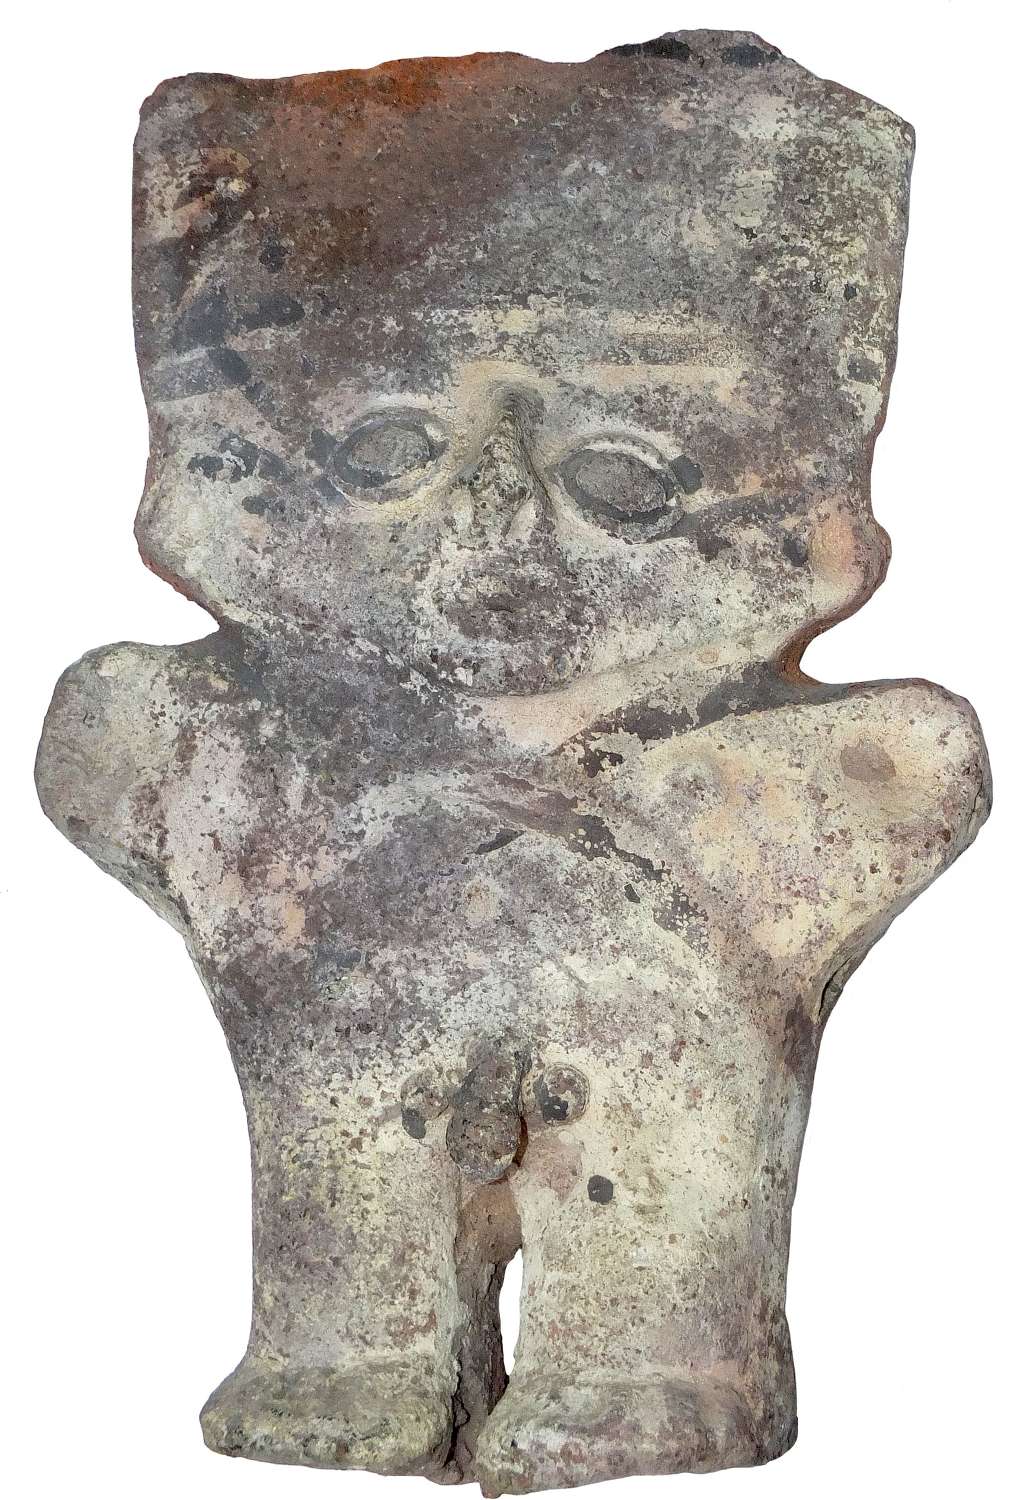 A large Chancay standing pottery male figure, Peru, c. 1300 A.D.